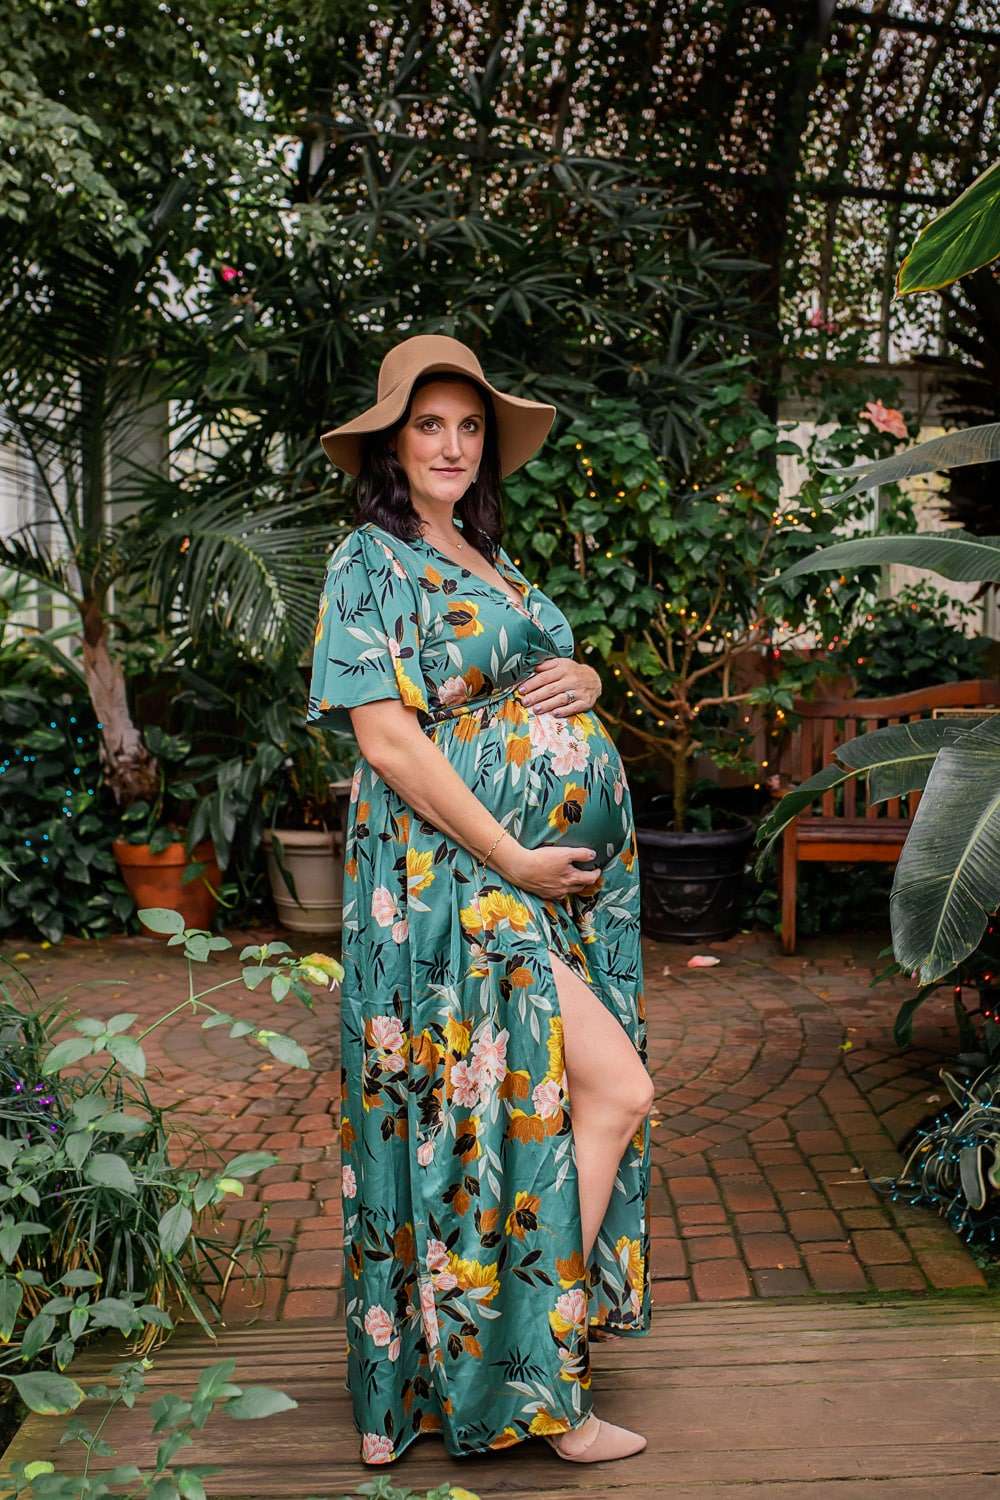 maternity photographer in rochester ny captures pregnany portraits of expectant mom in the lamberton conservatory